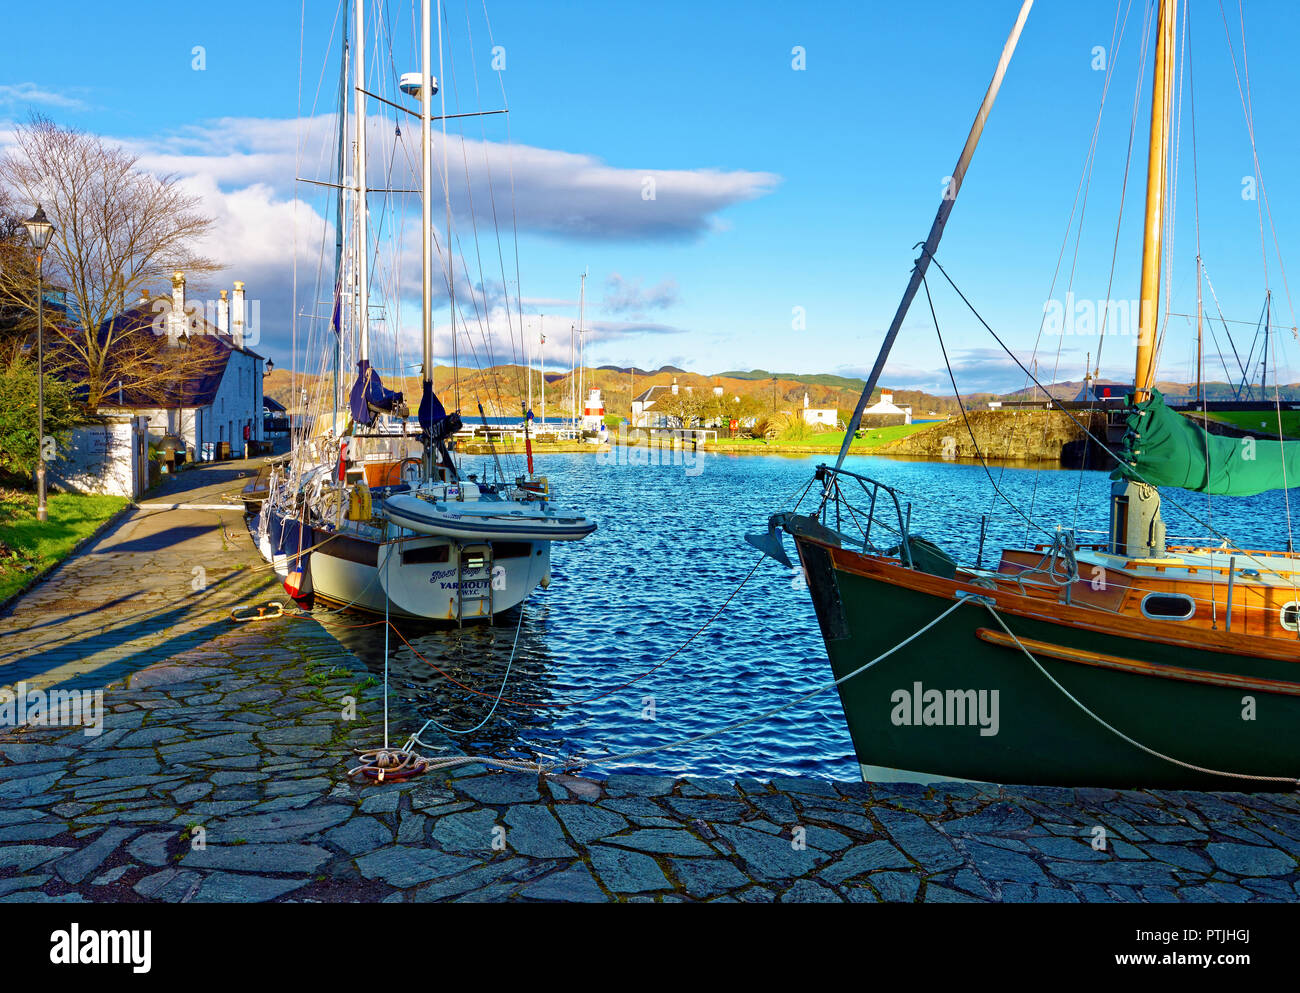 A sunny view of Crinan Harbour and the Crinan Canal along the Argyll and Bute coastline in the Scottish Highlands. Stock Photo